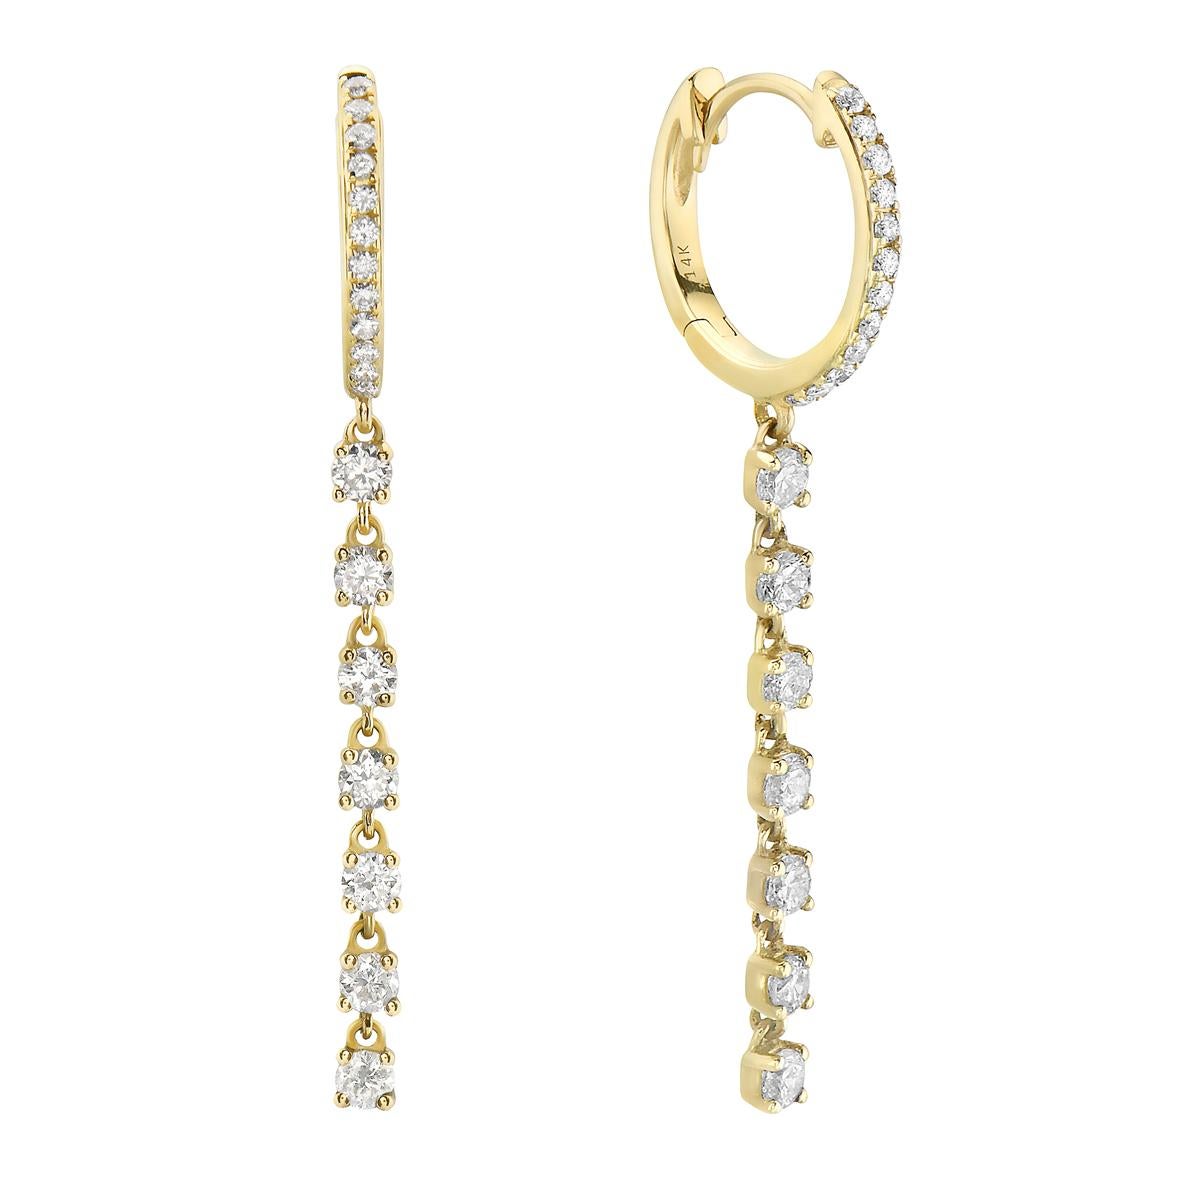 With these exquisite yellow gold dangle earrings, style and glamour are in the spotlight. These earrings are set in 14-carat gold, made out of 3.5 grams of gold. The color of the diamonds is GH. The clarity is SI1-OSI2. It is made out of 38 diamonds